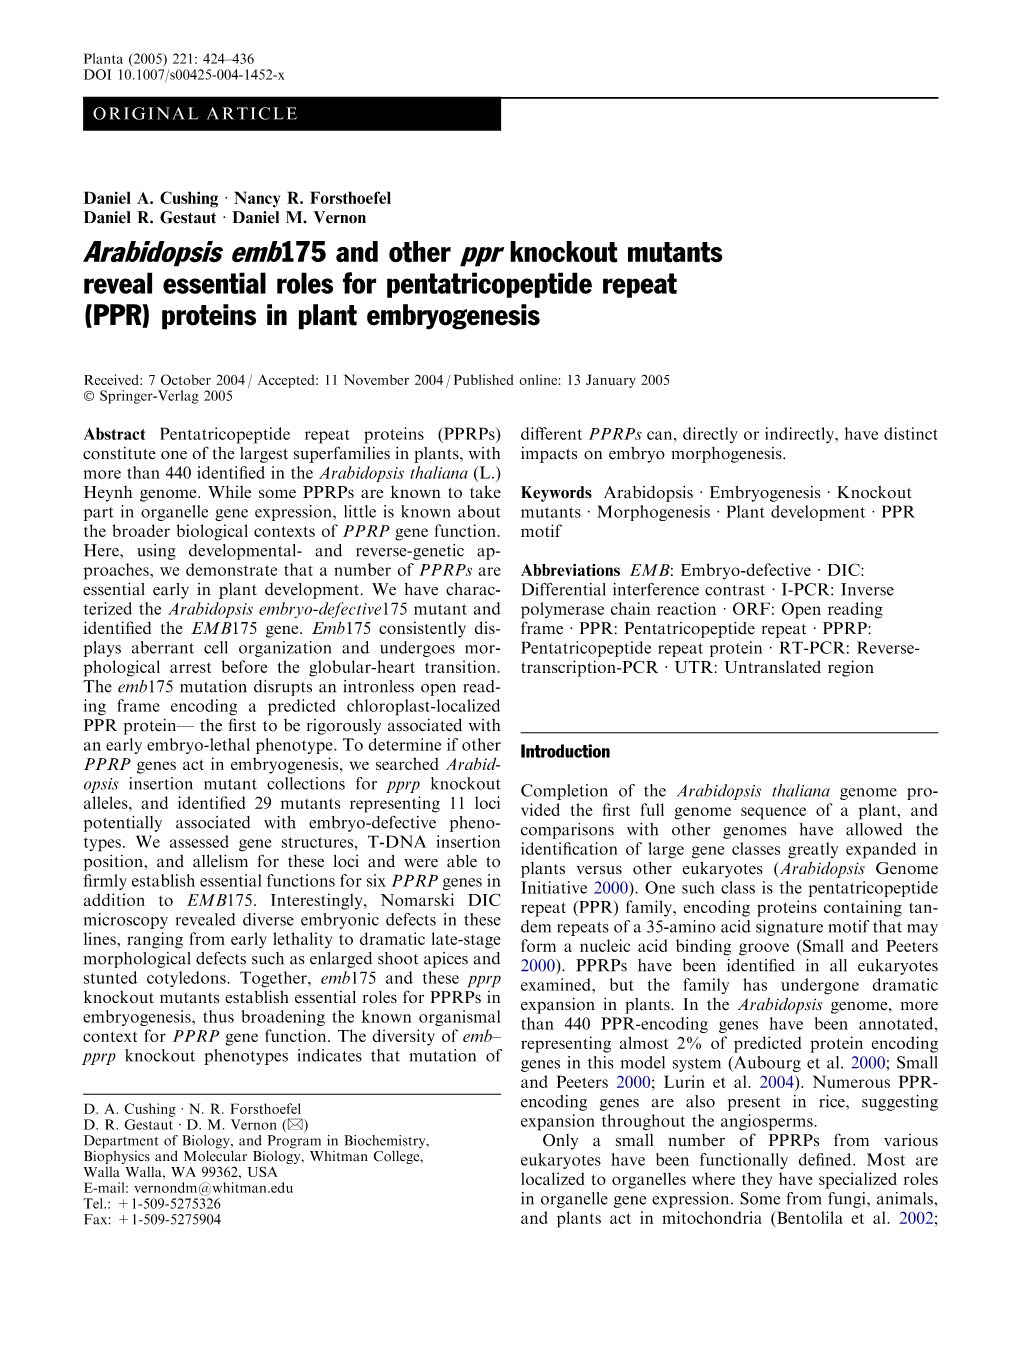 Arabidopsis Emb175 and Other Ppr Knockout Mutants Reveal Essential Roles for Pentatricopeptide Repeat (PPR) Proteins in Plant Embryogenesis